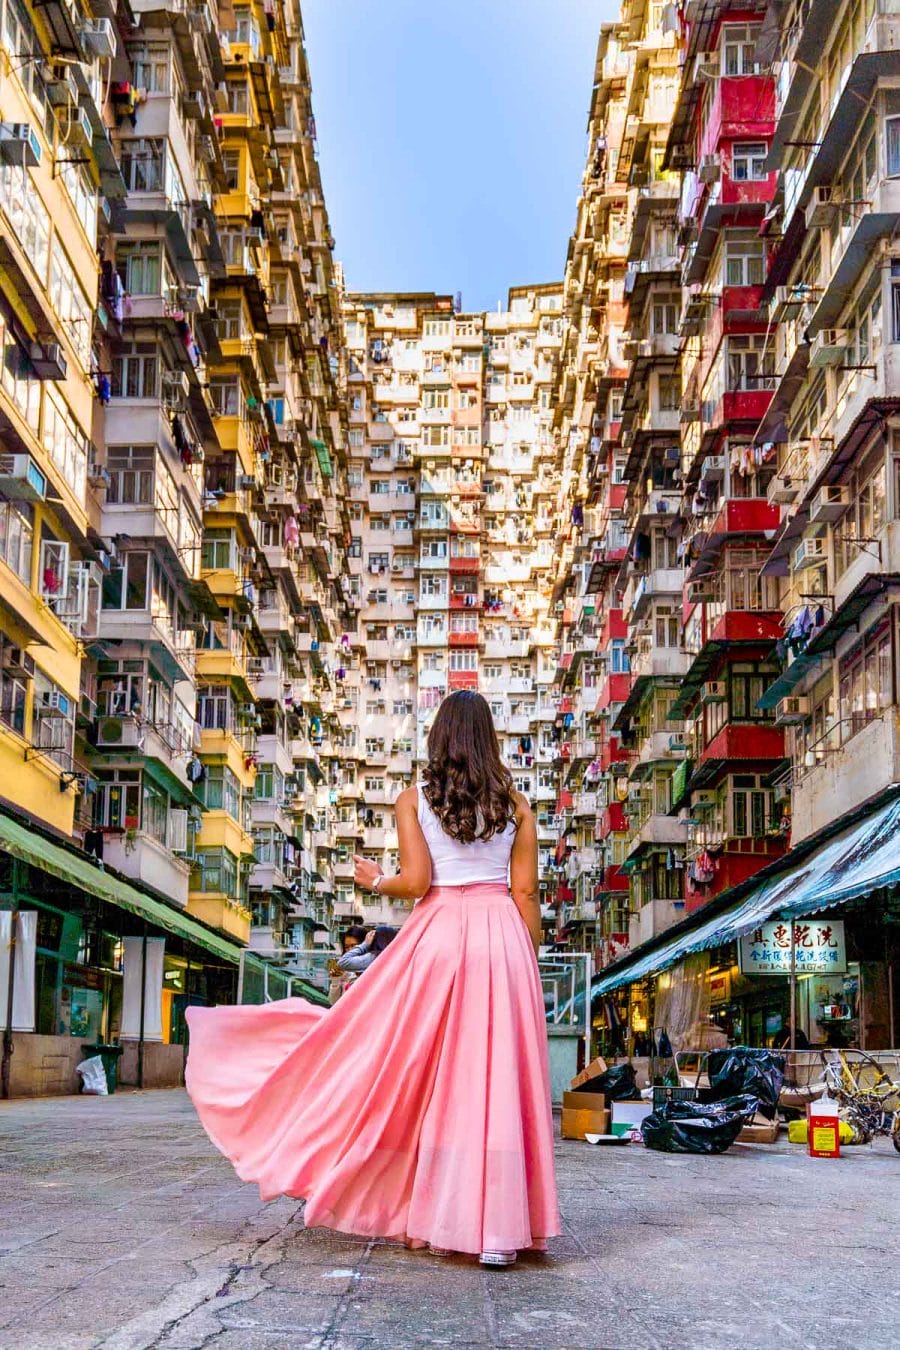 Girl in a pink skirt standing in front of Fok Cheok Building, aka the Monster building in Hong Kong